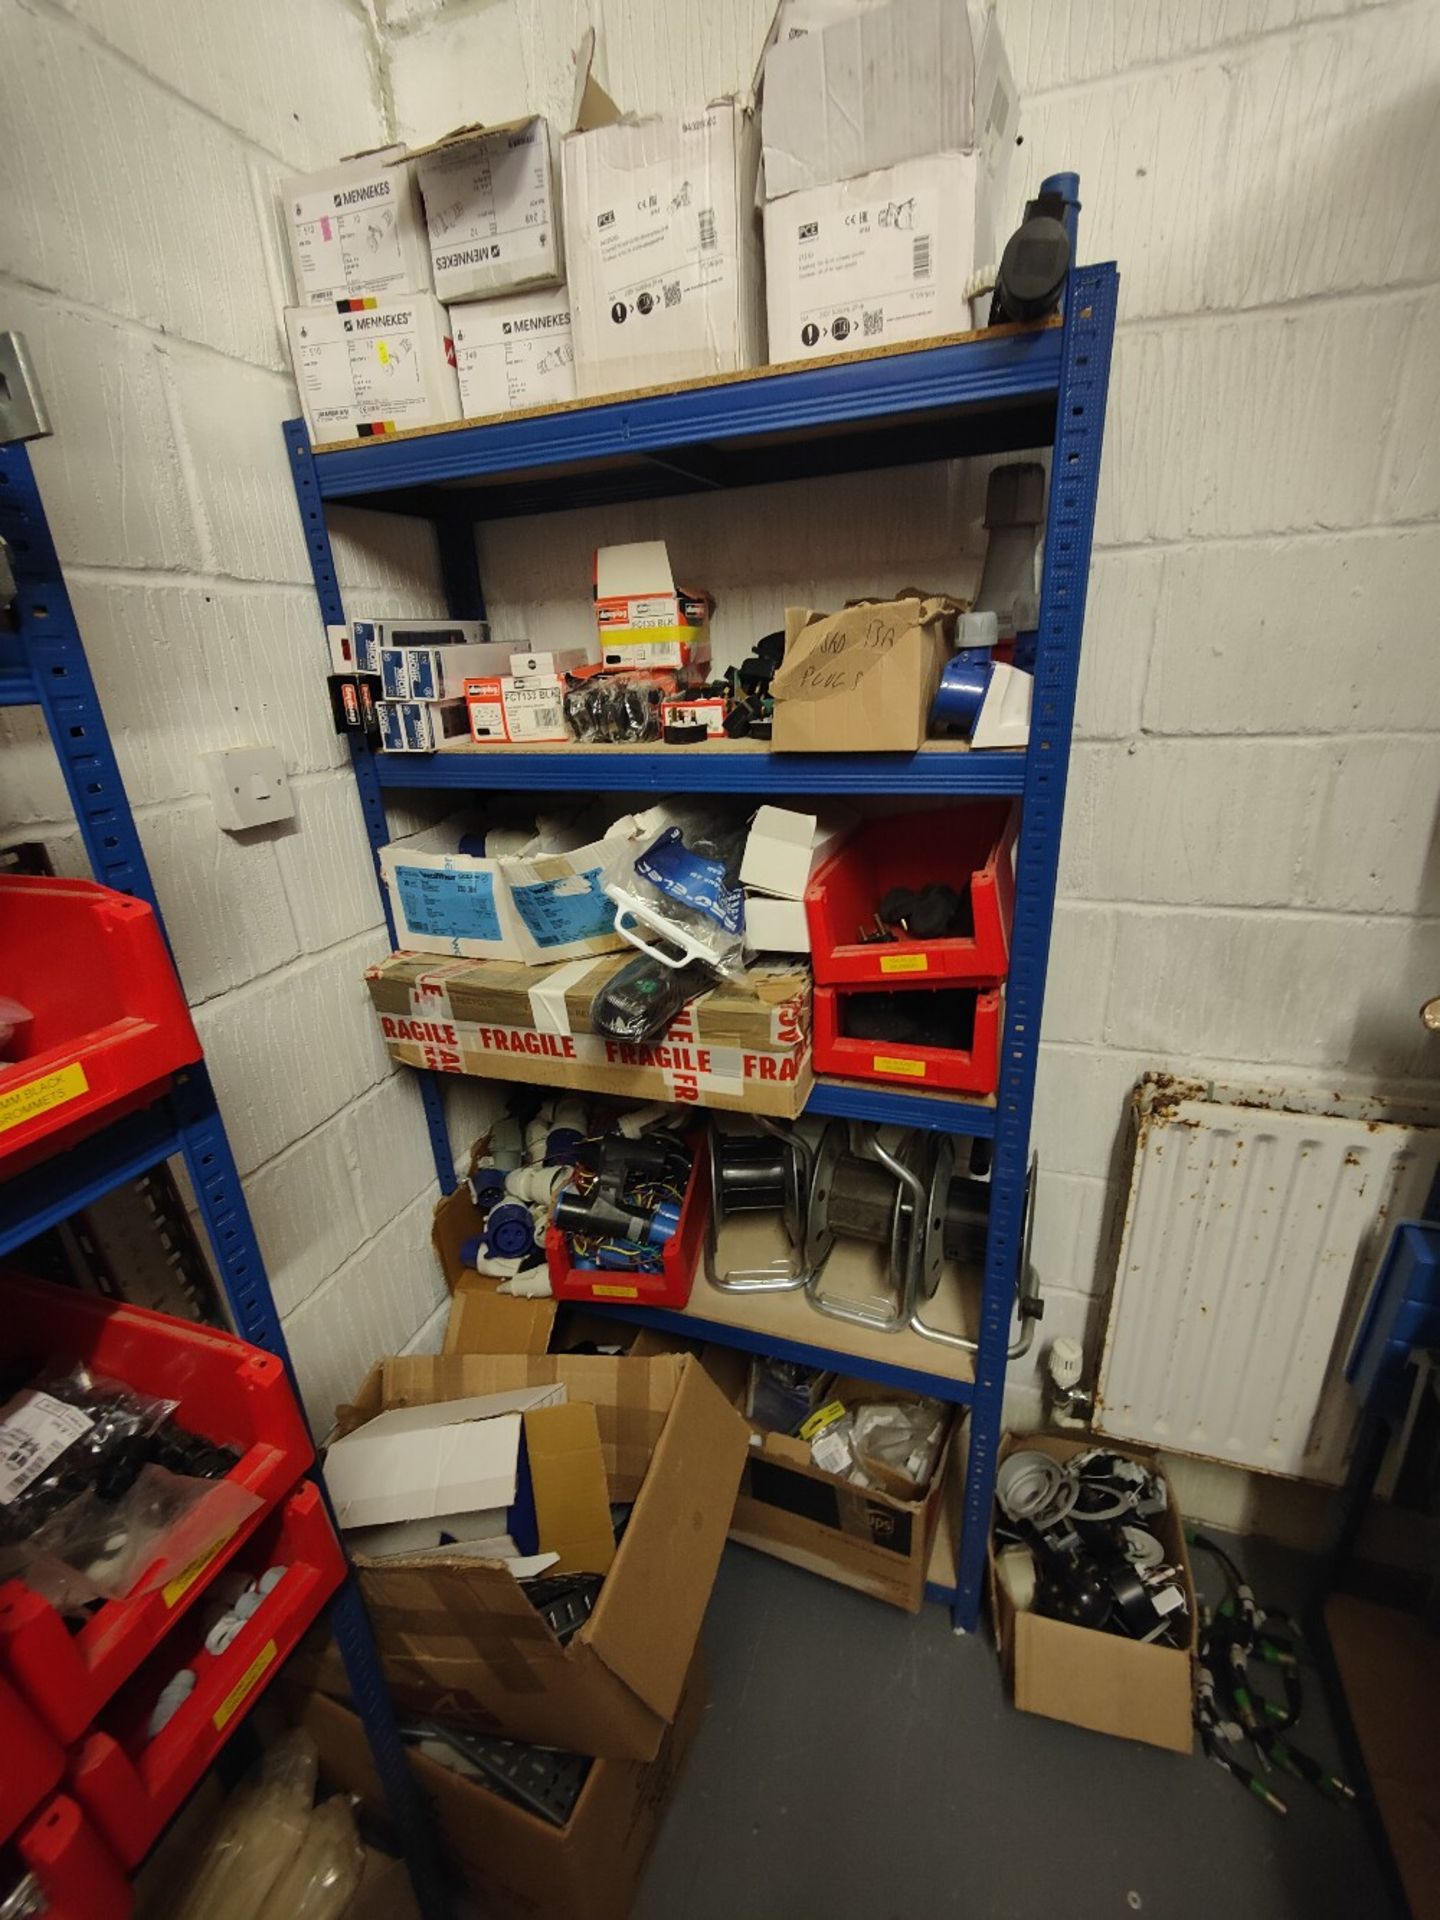 Contents of Room - To Include: Sound and Lighting Spares, Electrical Cables, Electrical Tools Etc. - Image 7 of 11